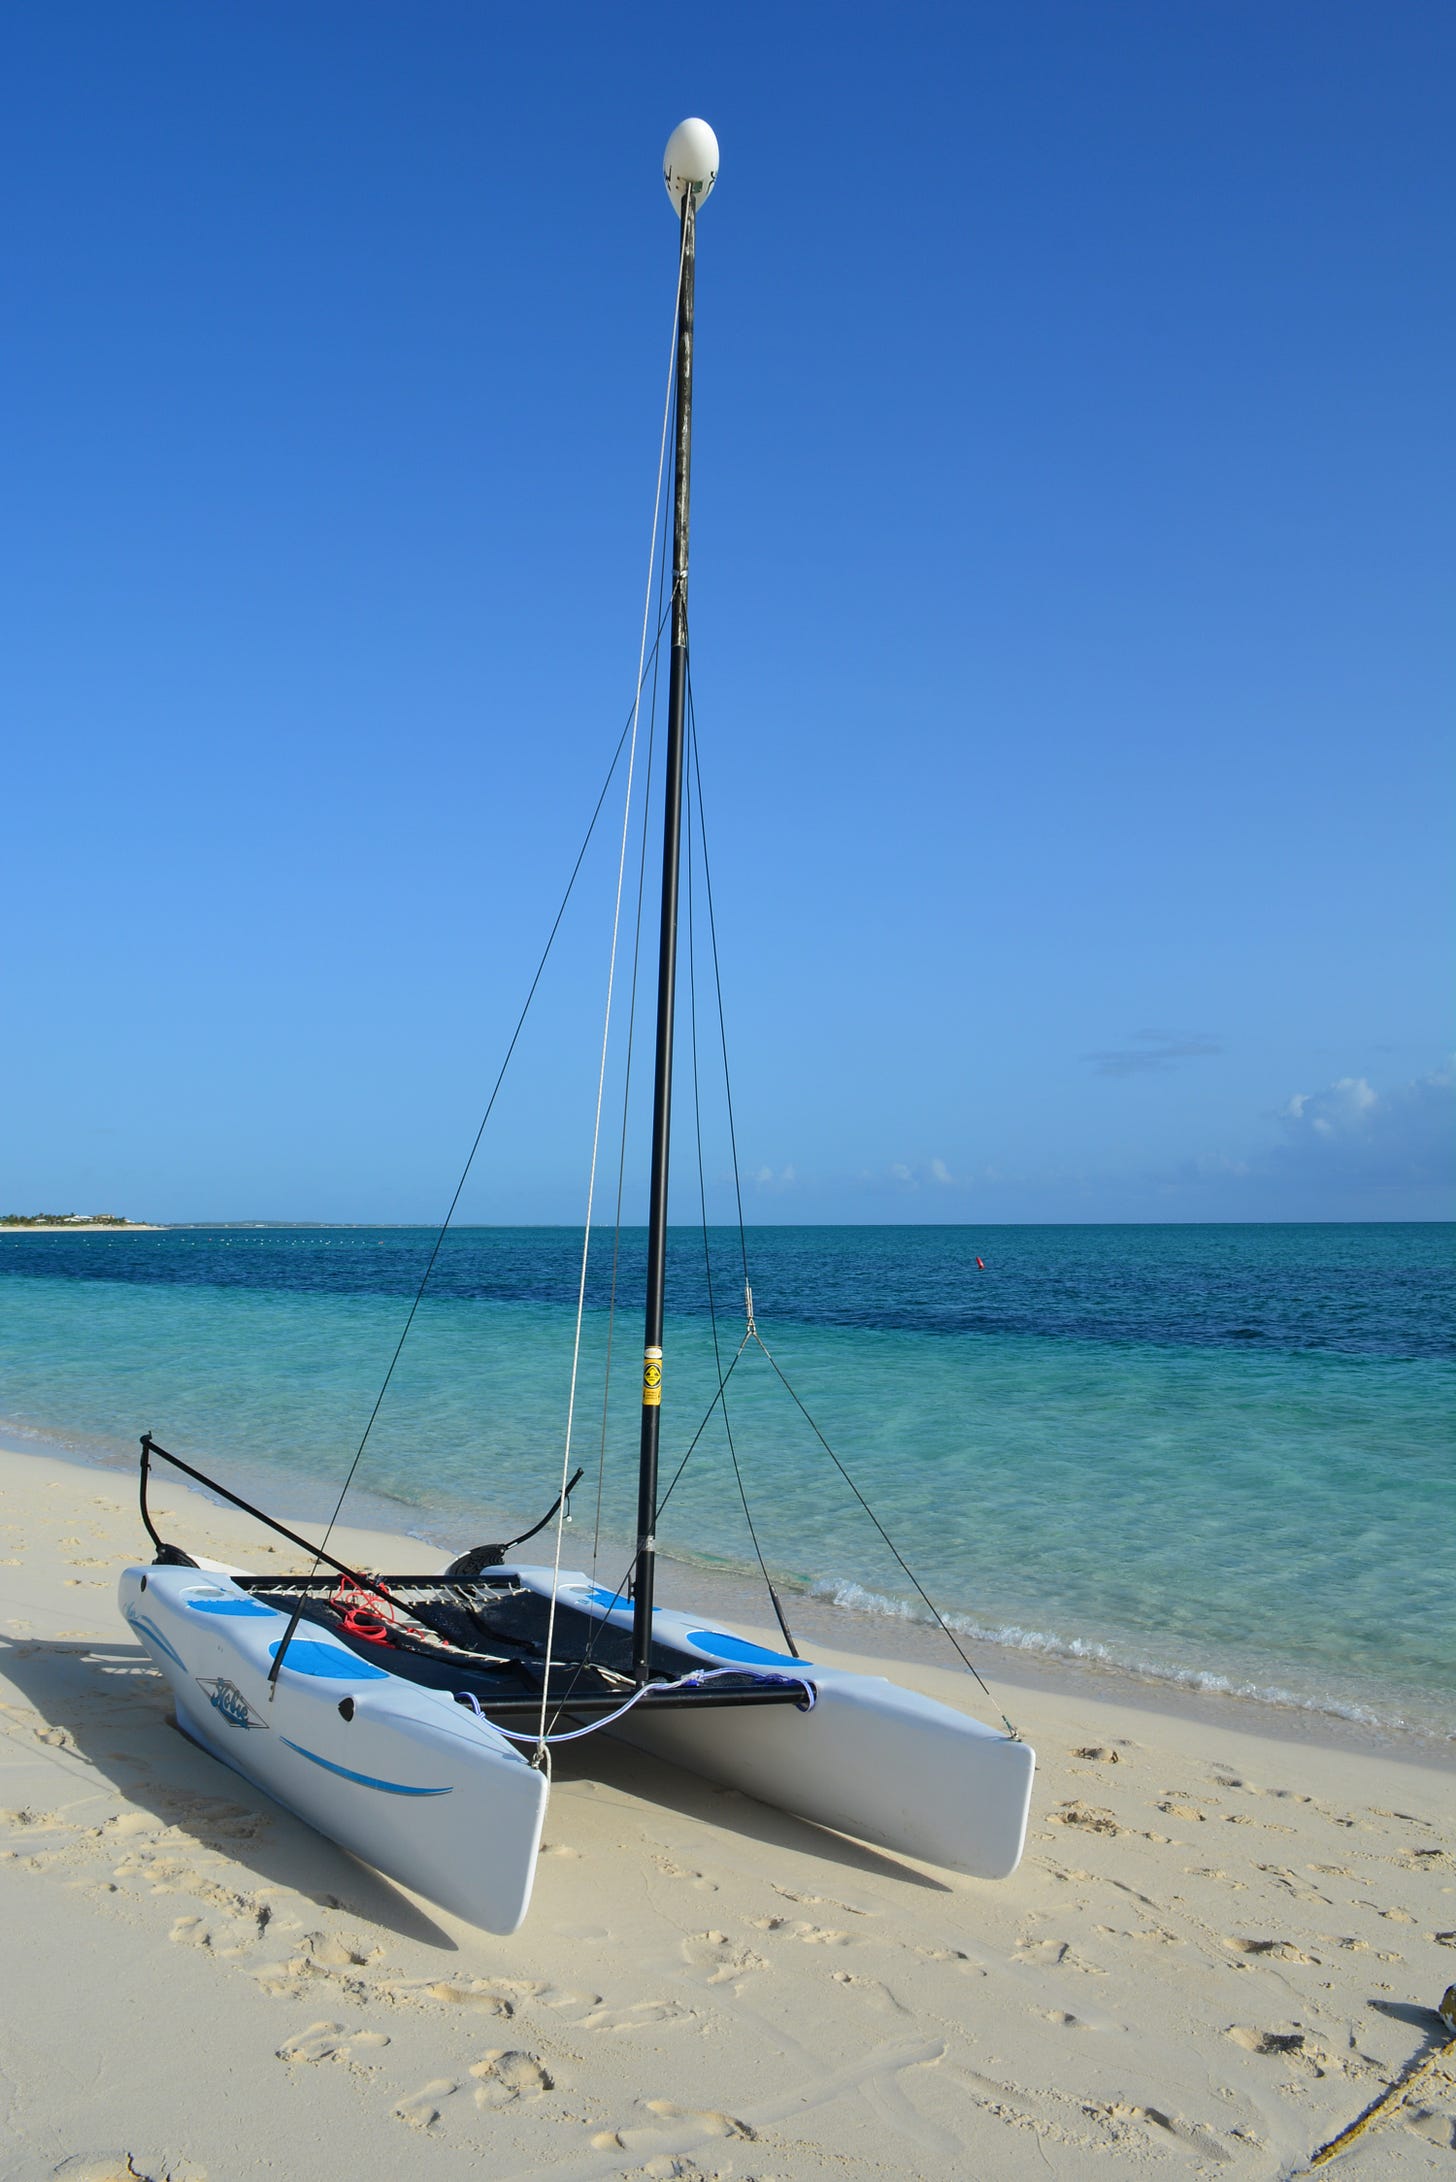 A white-hulled catamaran sits on the sandy beach with the turquise water of the ocean n the background